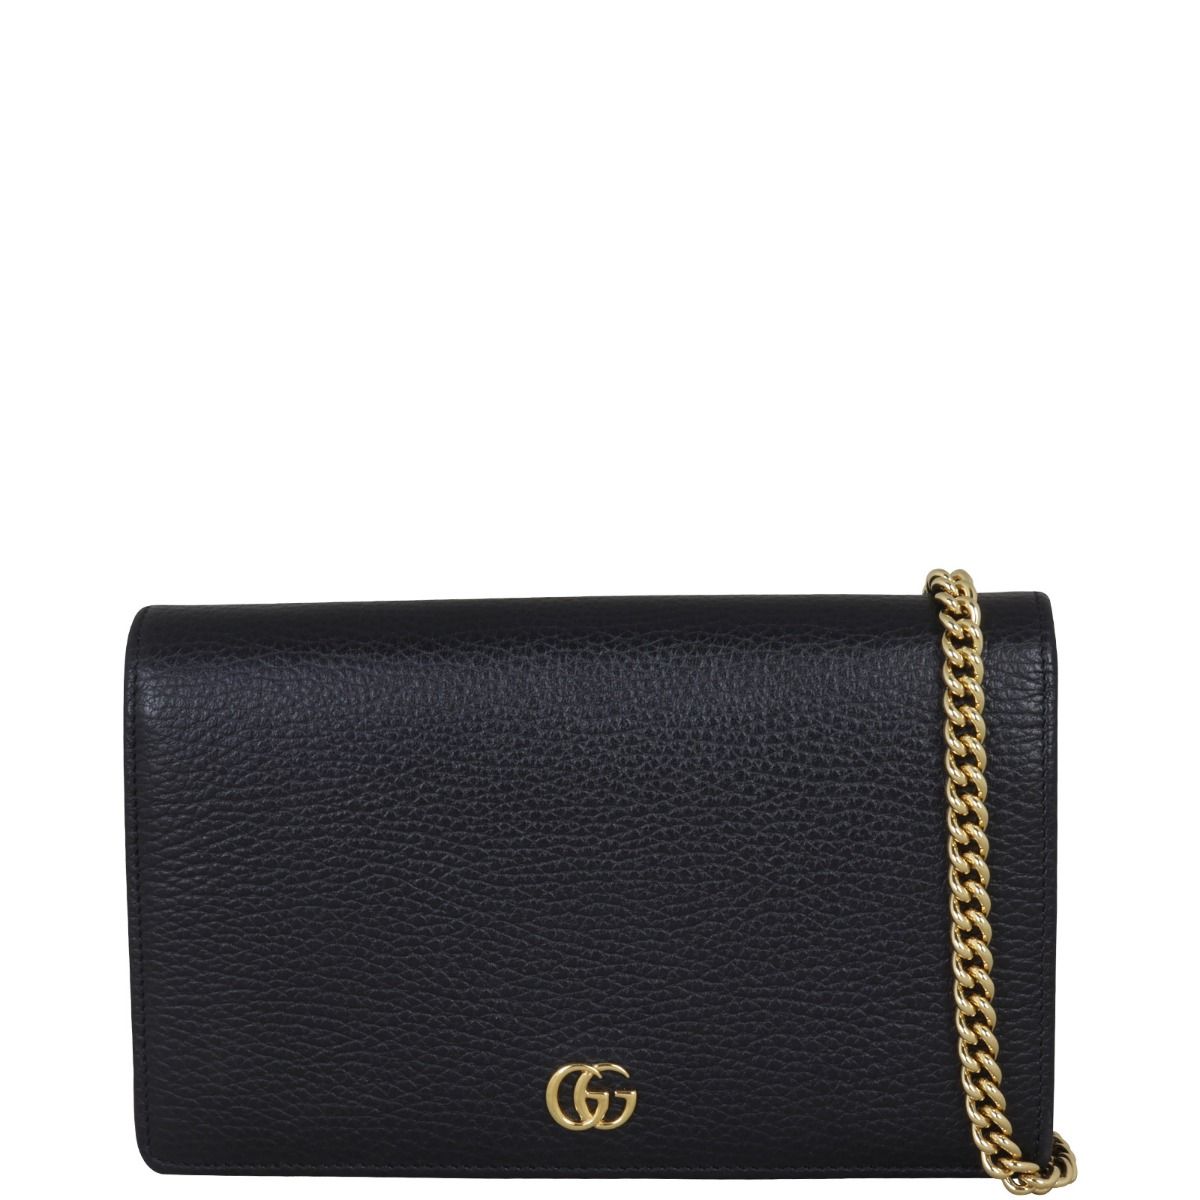 Gucci, Bags, Gucci Monogram Long Wallet Cute On Chain